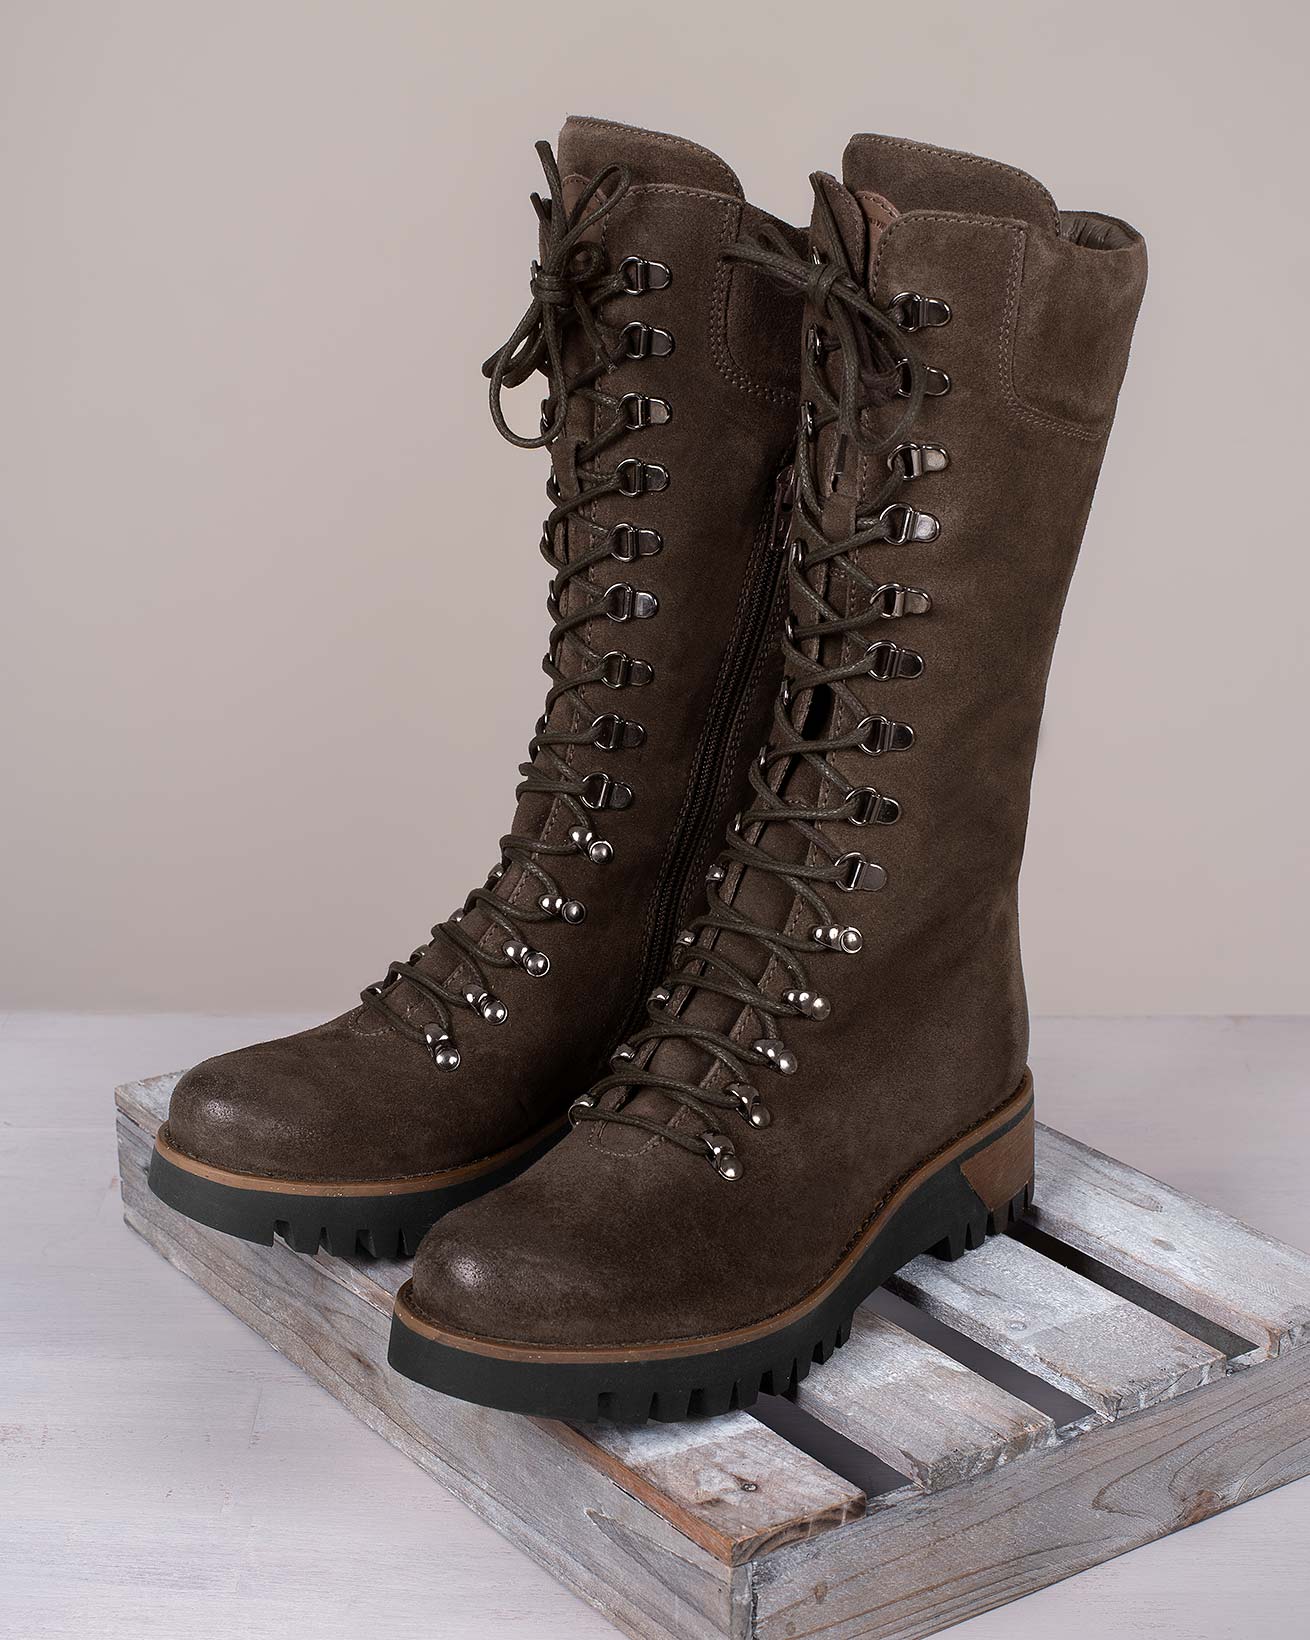 7082_wilderness-boots_tanners-brown_lifestyle_v2_web.jpg